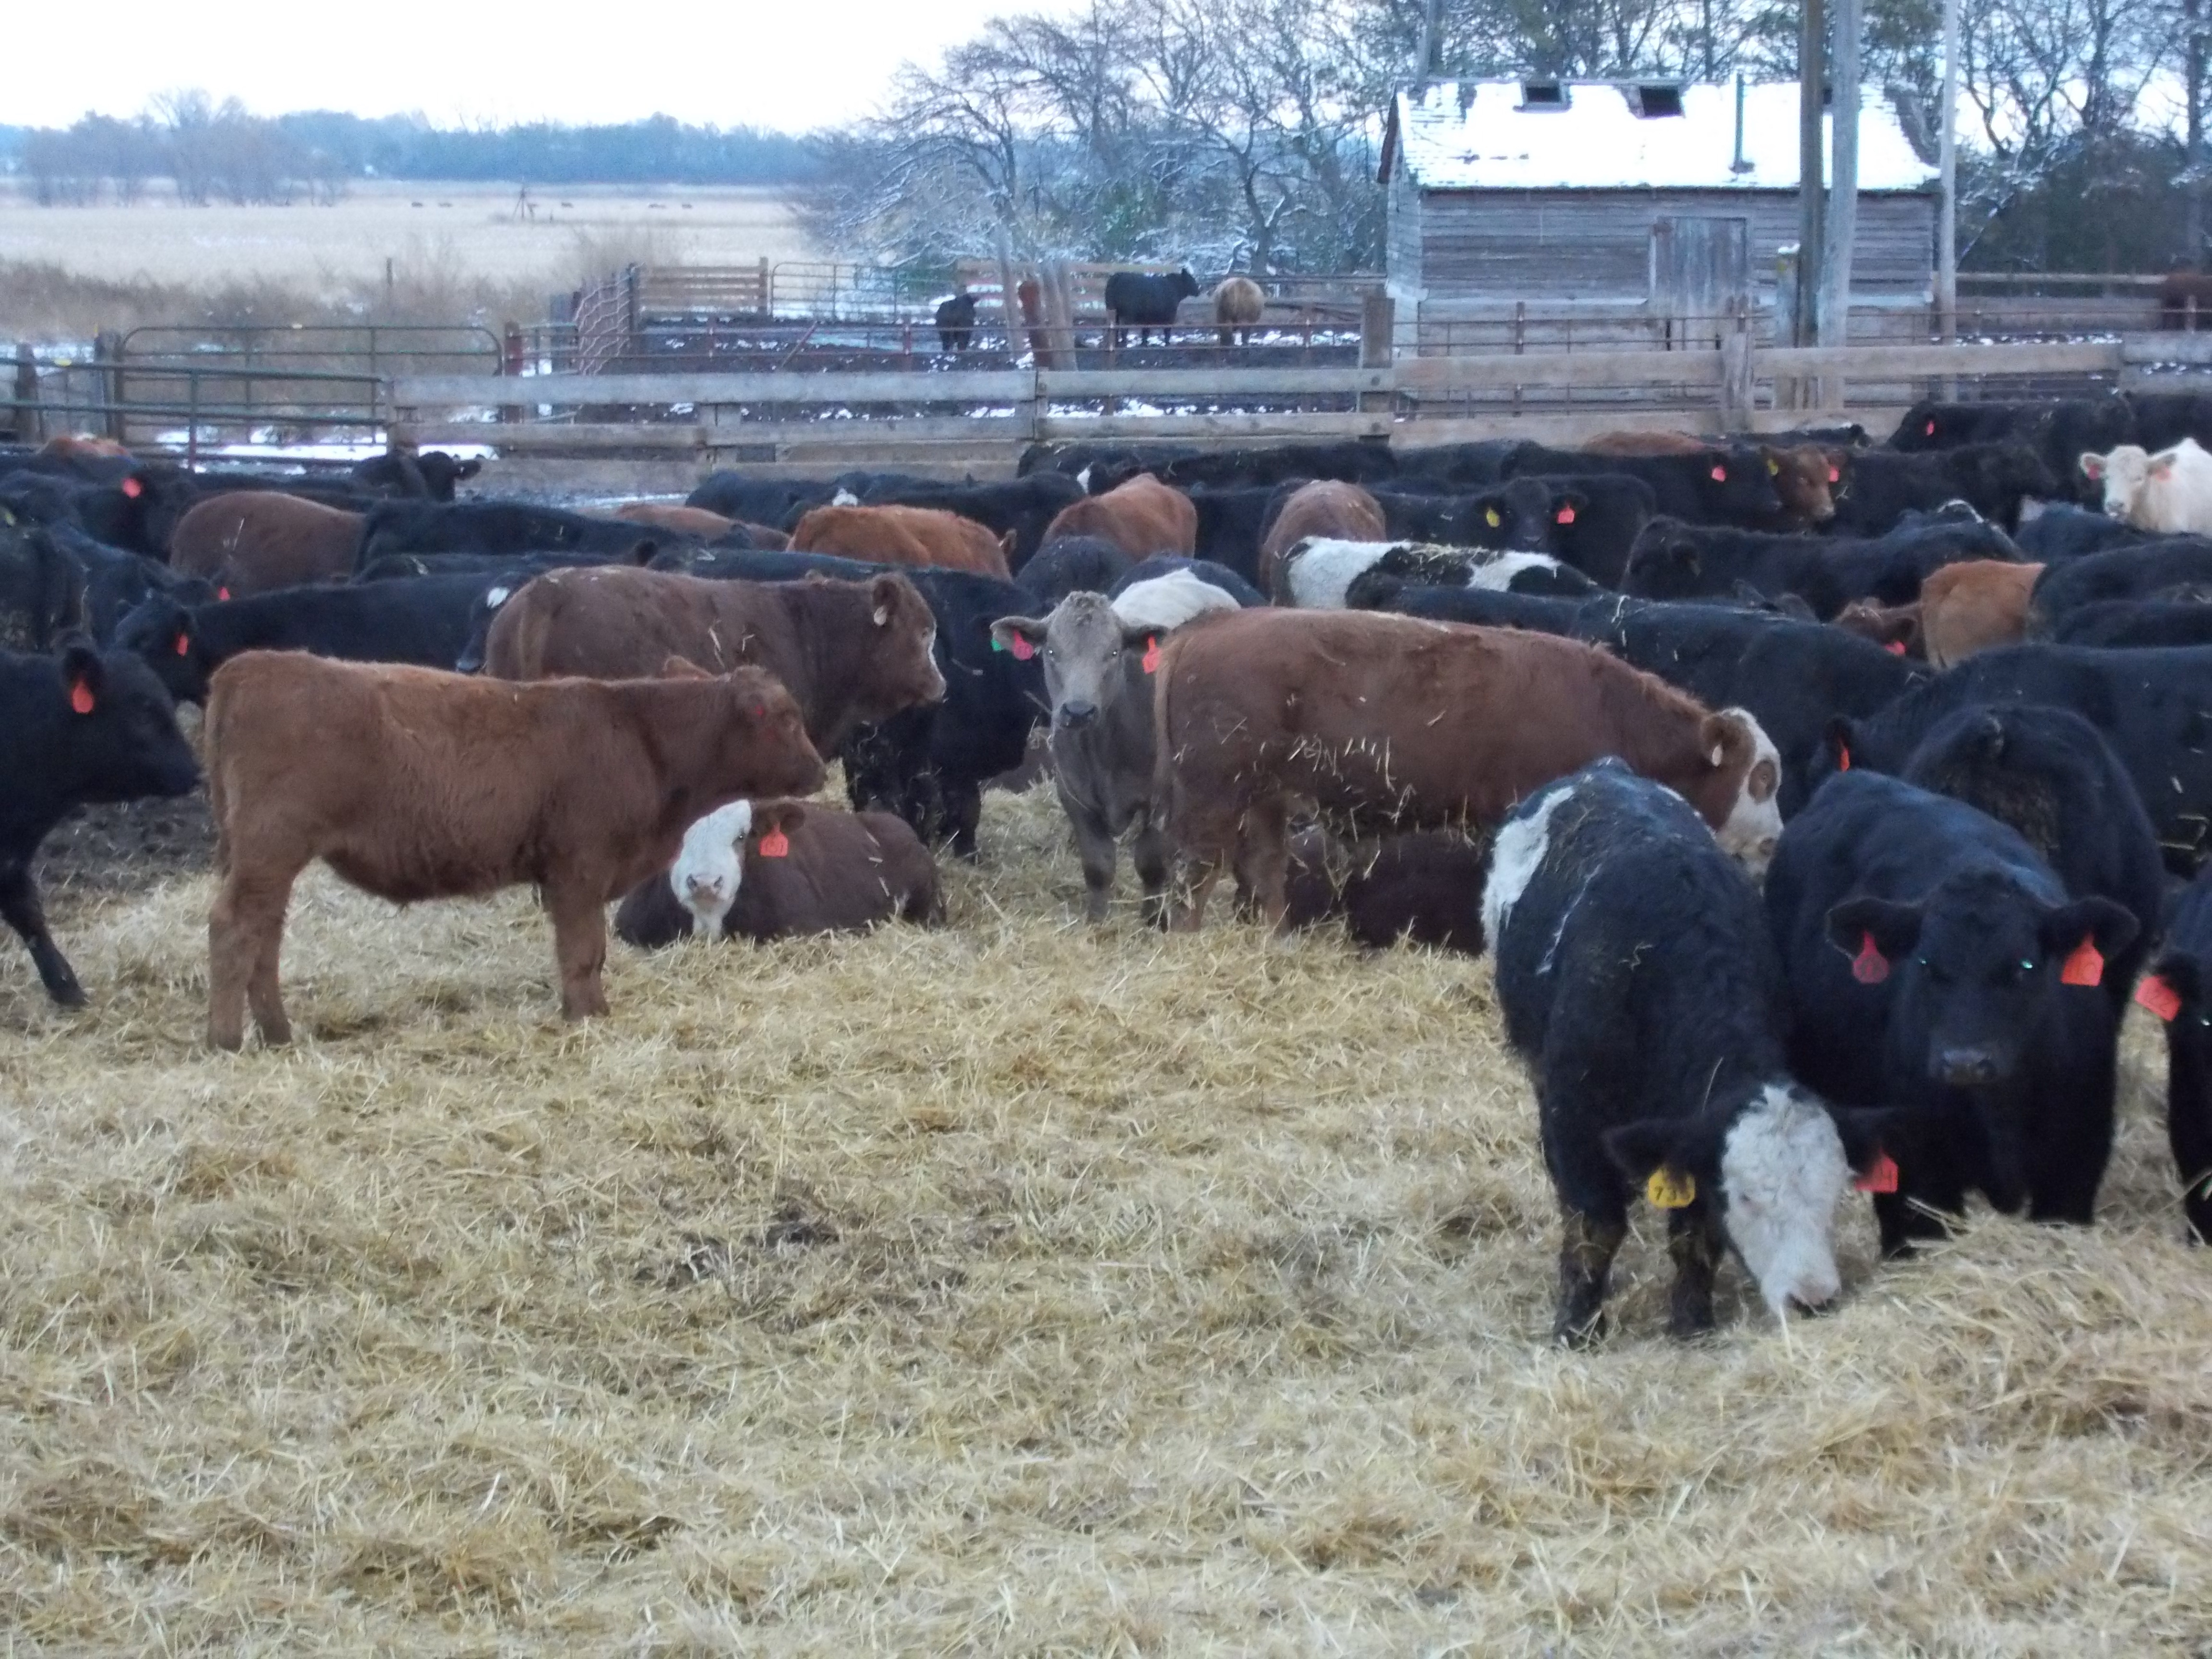 A group of calves in a feedlot with ample bedding.